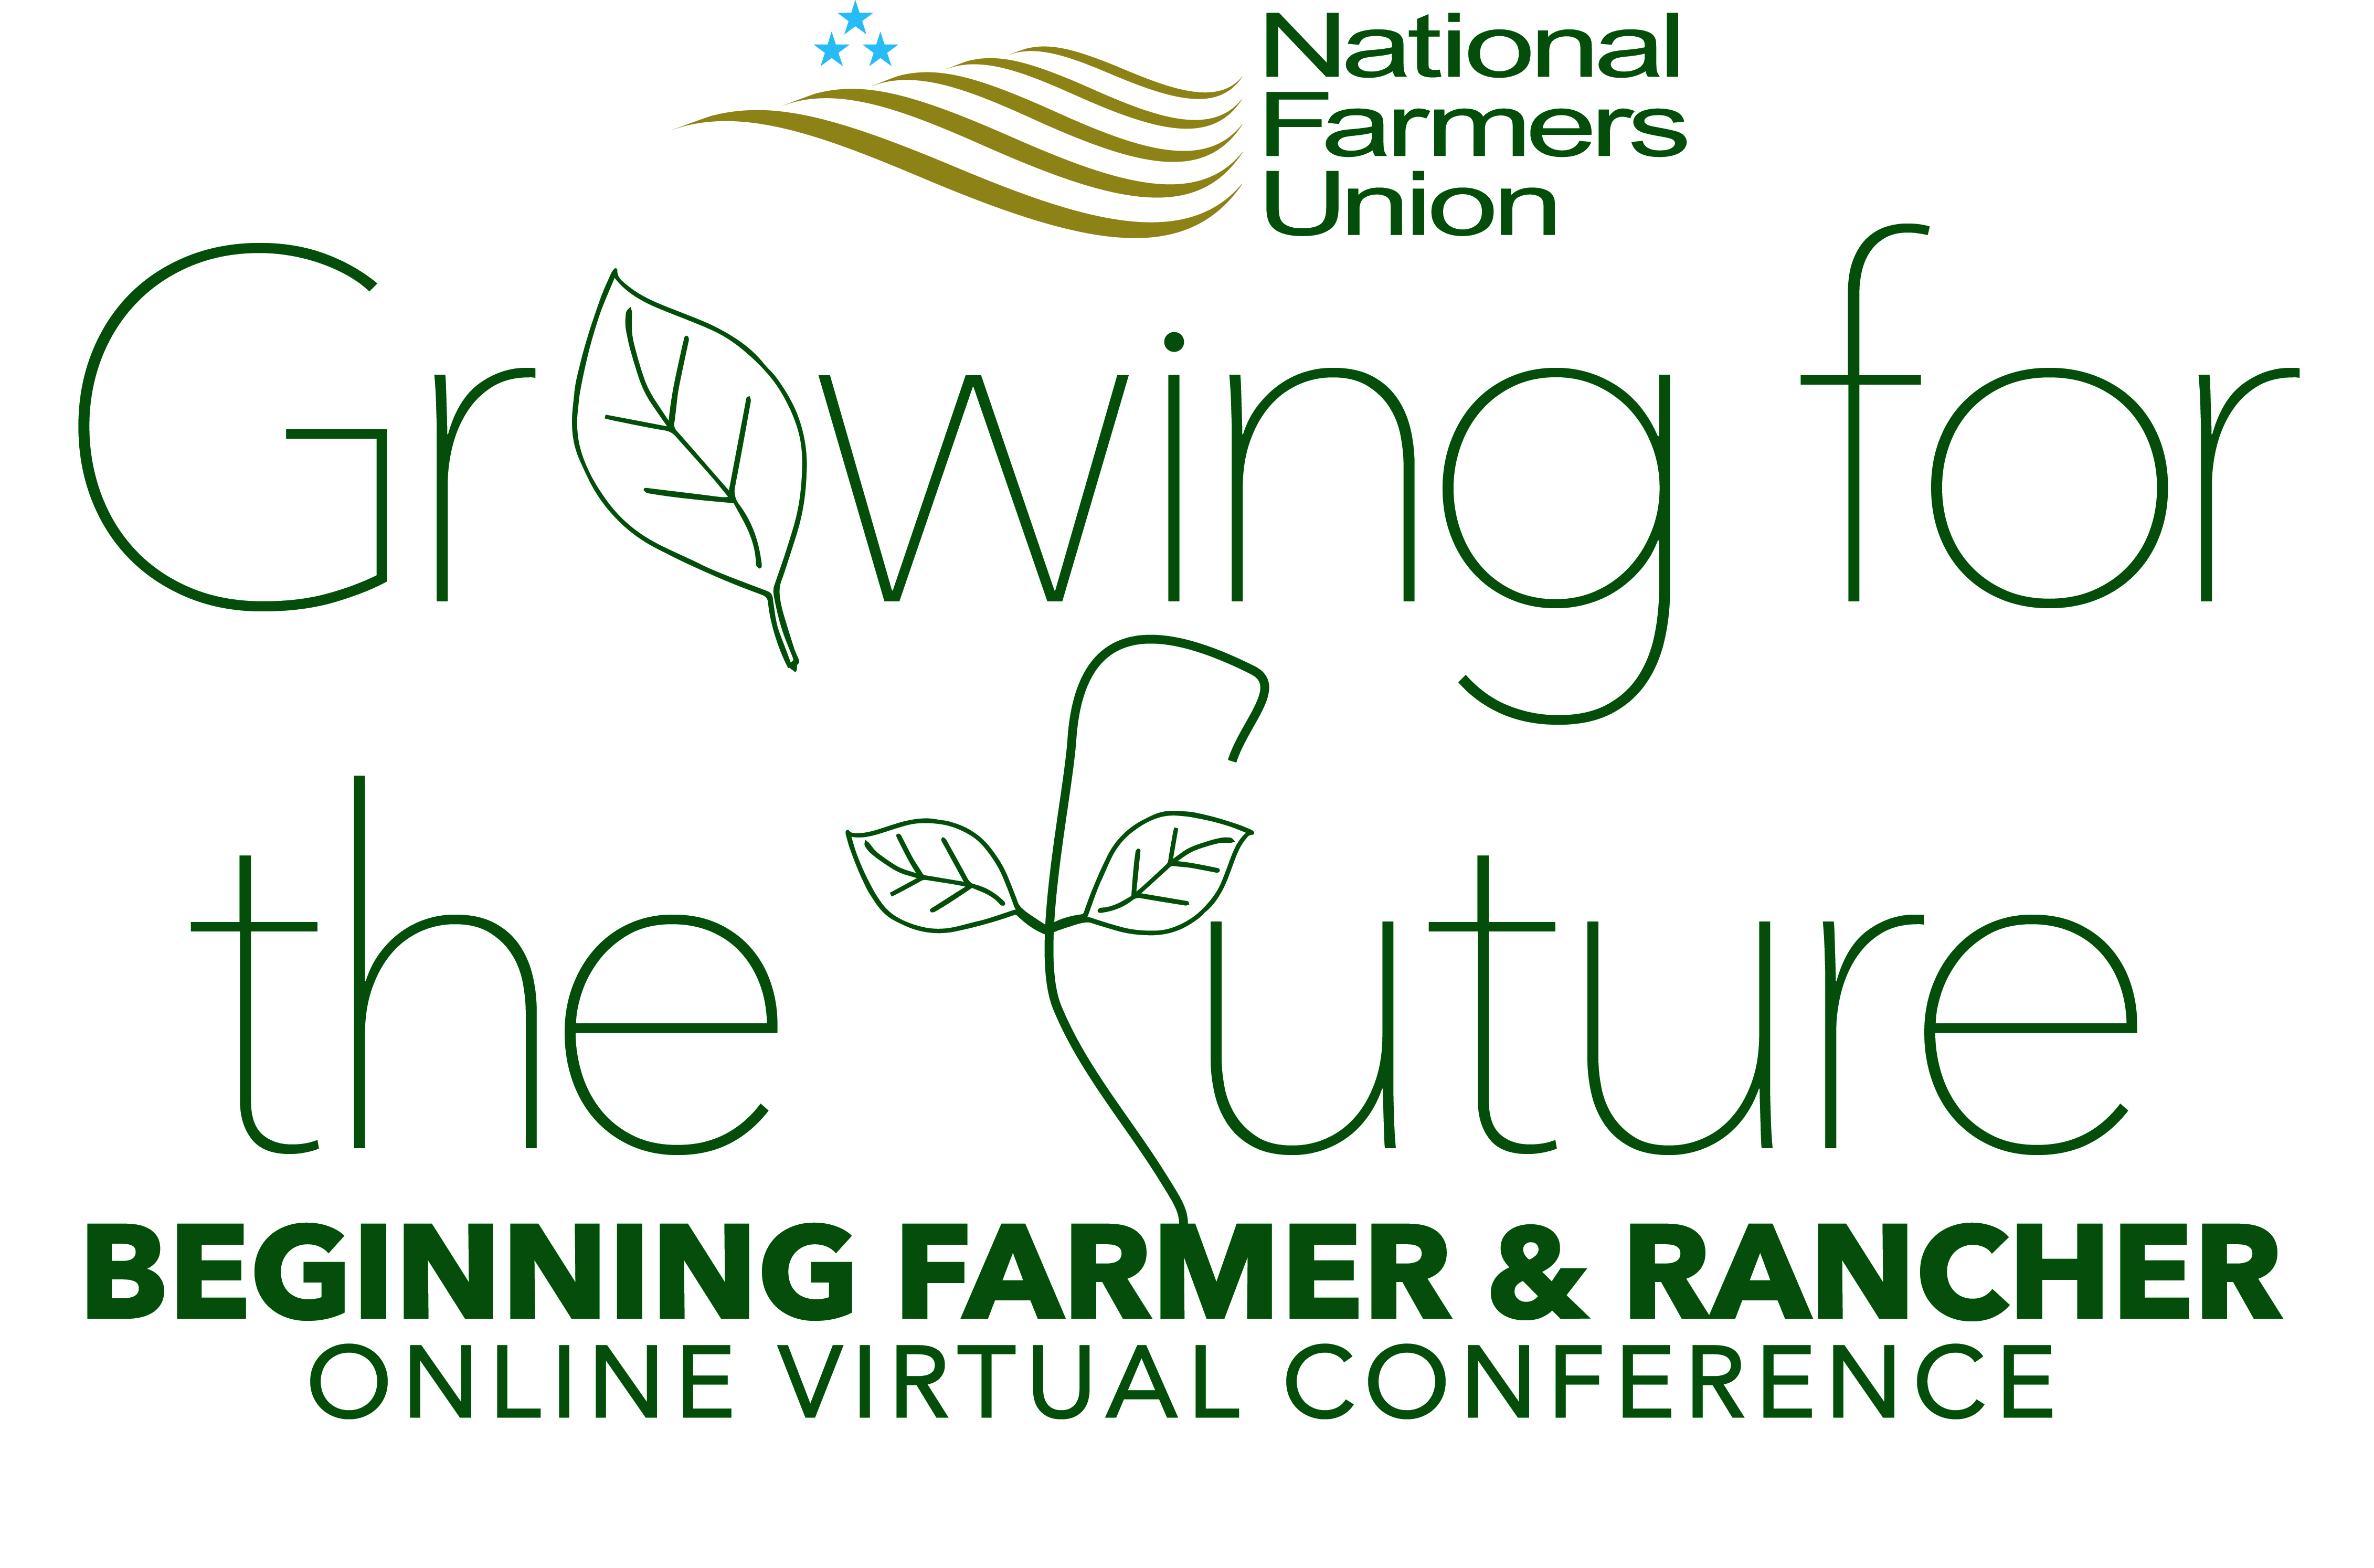 More than 1,000 Beginning Farmers and Ranchers Attend NFU Online Conference